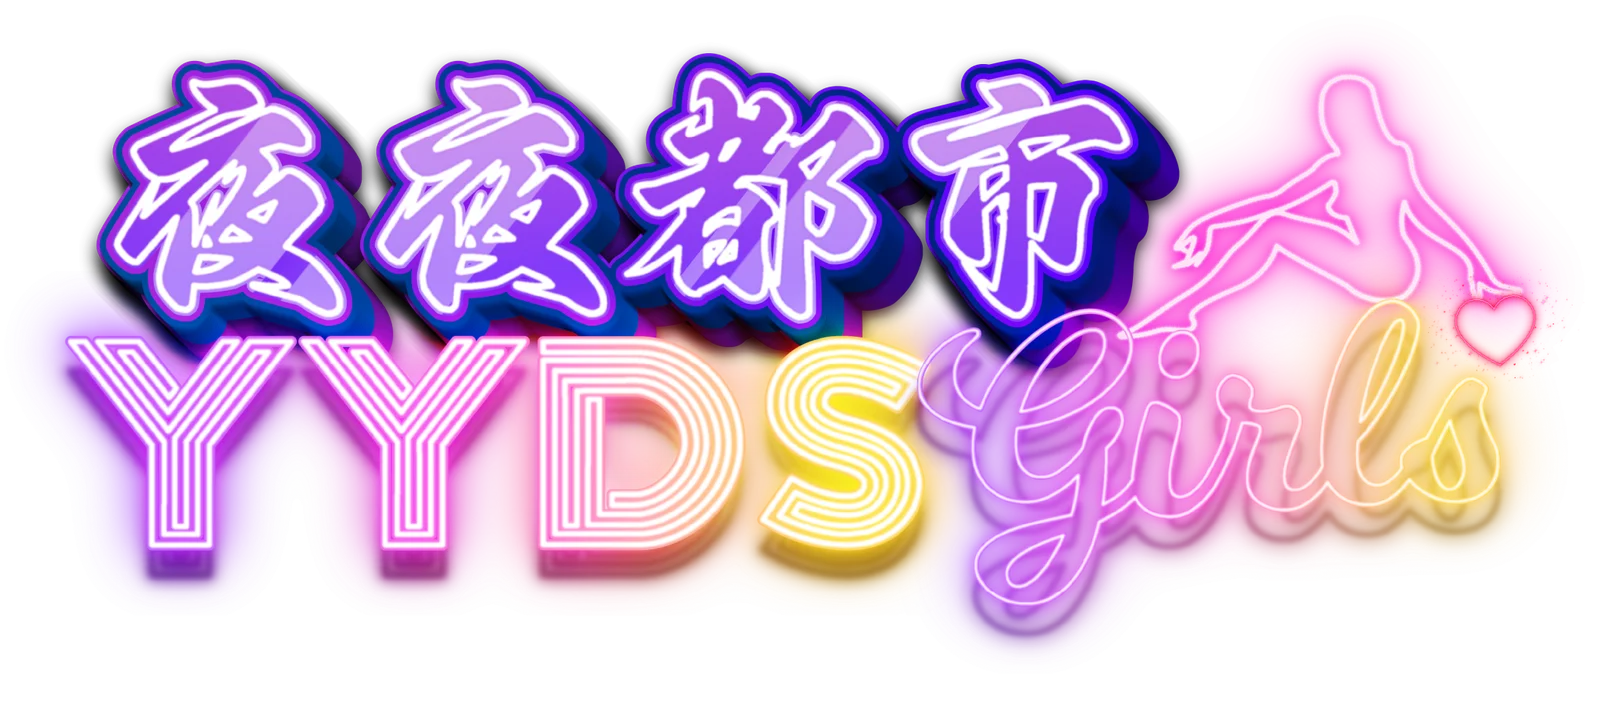 YYDS